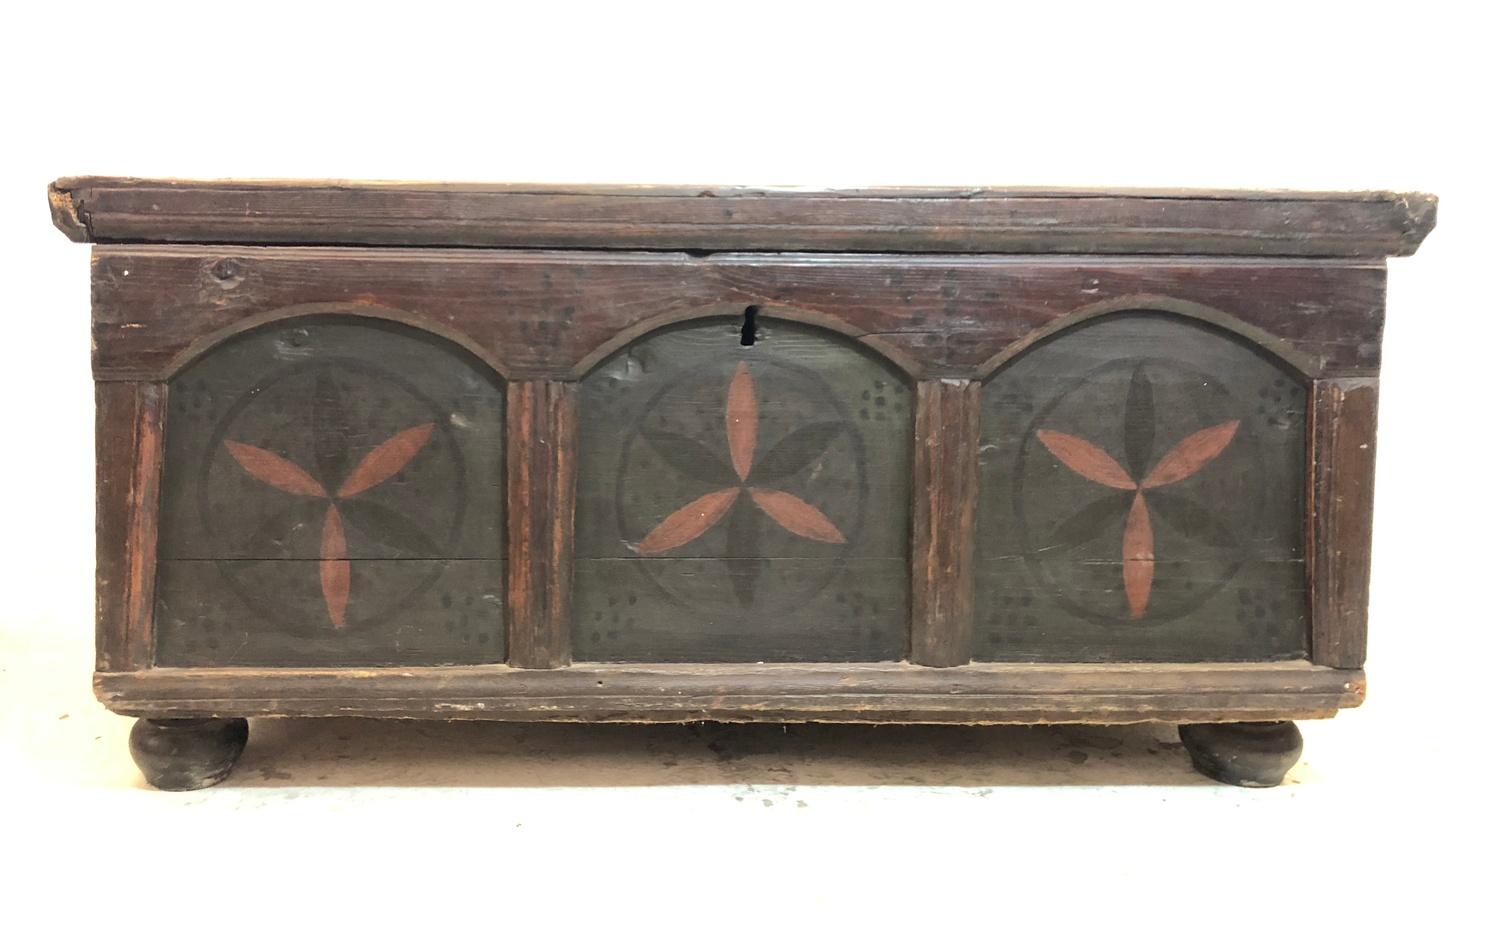 Large Late C18th/Early C19th Ukrainian Painted Pine Coffer marked with propeller symbols to ward off - Image 2 of 4